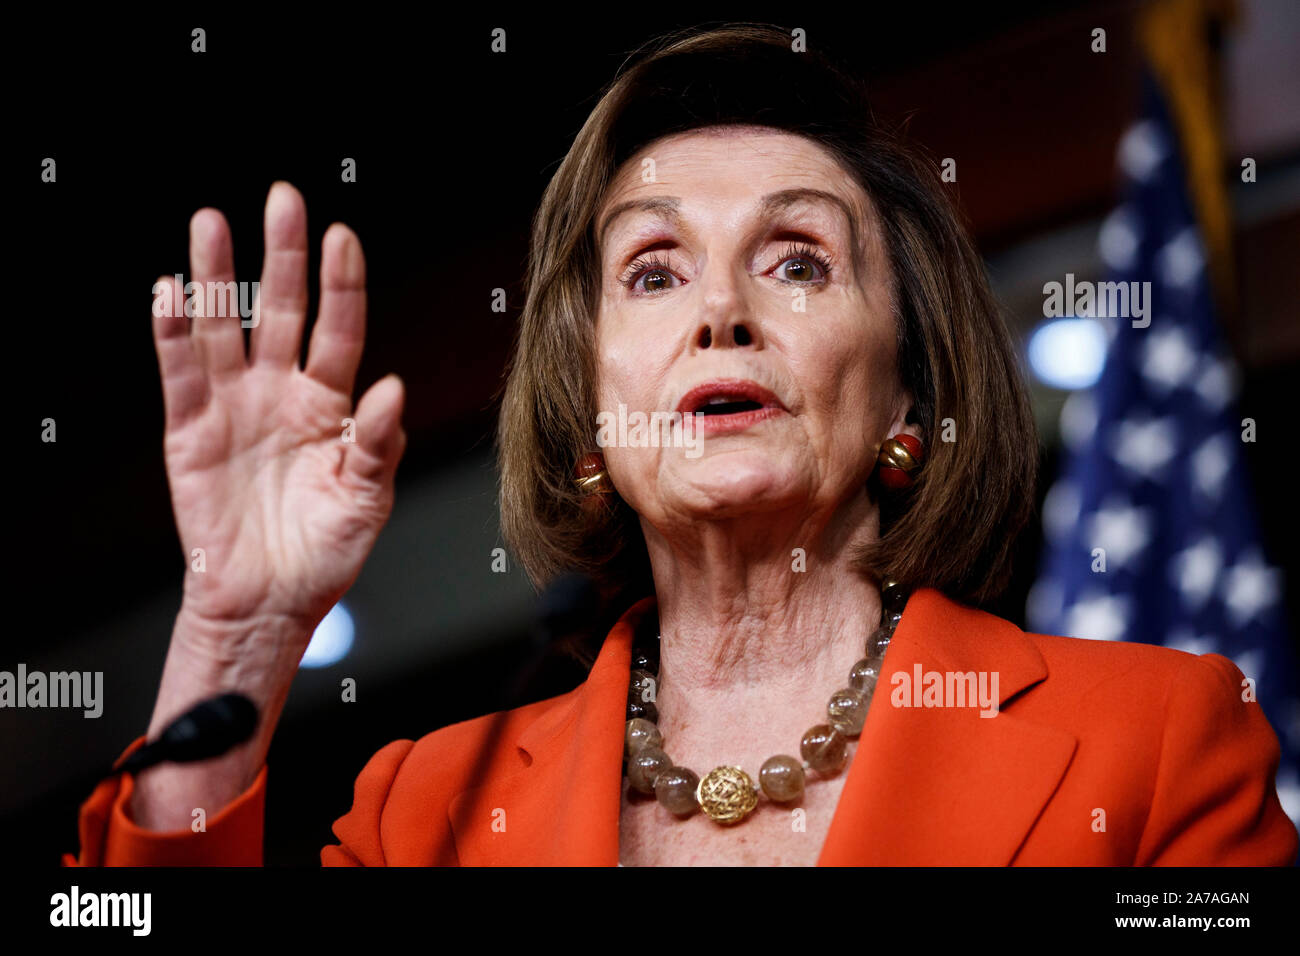 Washington, USA. 31st Oct, 2019. U.S. House Speaker Nancy Pelosi speaks during a press conference on Capitol Hill in Washington, DC, the United States, on Oct. 31, 2019. The U.S. House of Representatives voted on Thursday to approve a resolution designed to formalize proceedings of an impeachment inquiry into President Donald Trump. Credit: Ting Shen/Xinhua/Alamy Live News Stock Photo